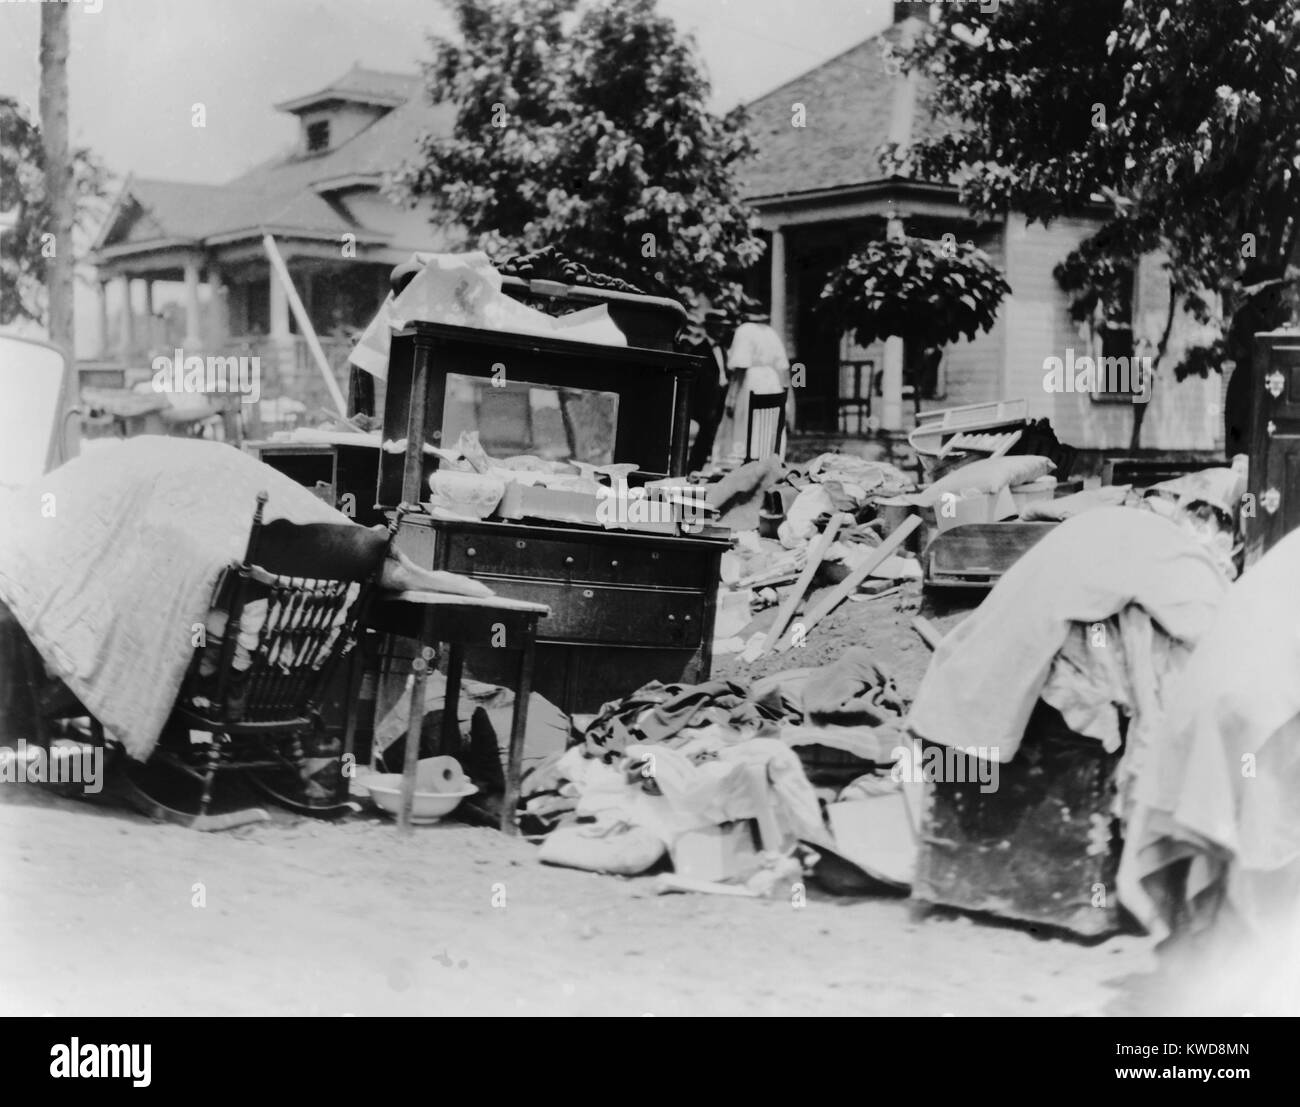 Furniture and belongings in Tulsa street during race riot of May 31 - June 1, 1921. Original caption states the owner was probably evicted during the riot. Photo by Alvin C. Krupnick Company, Tulsa, Okla. (BSLOC_2015_16_157) Stock Photo